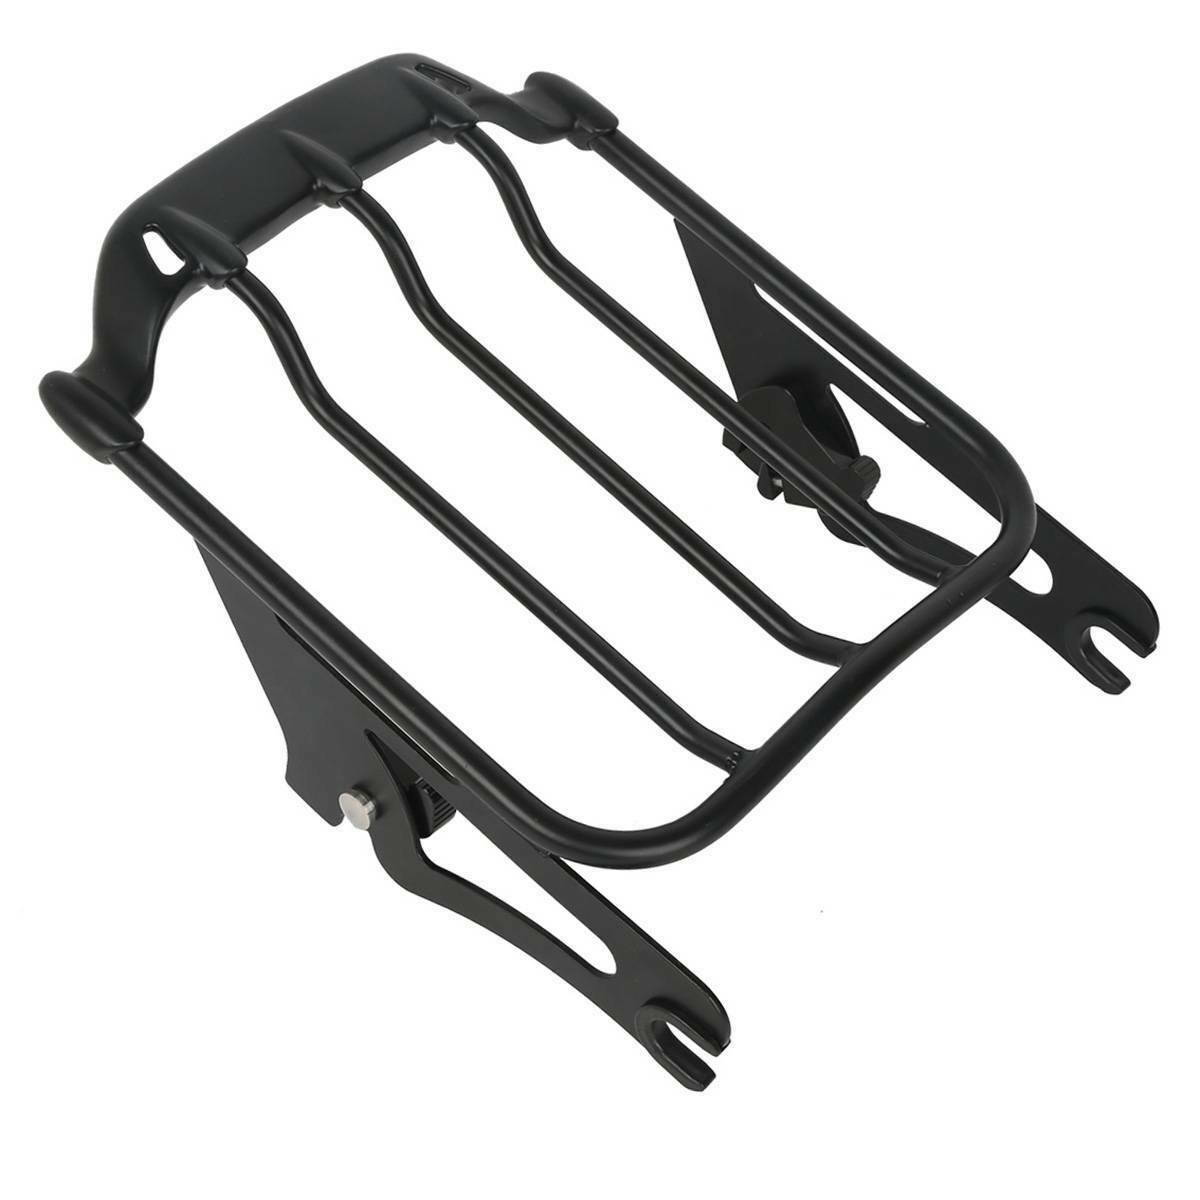 Sissy Bar Backrest Luggage Rack Docking Fit For Harley Touring Air Wing 14-22 - Moto Life Products